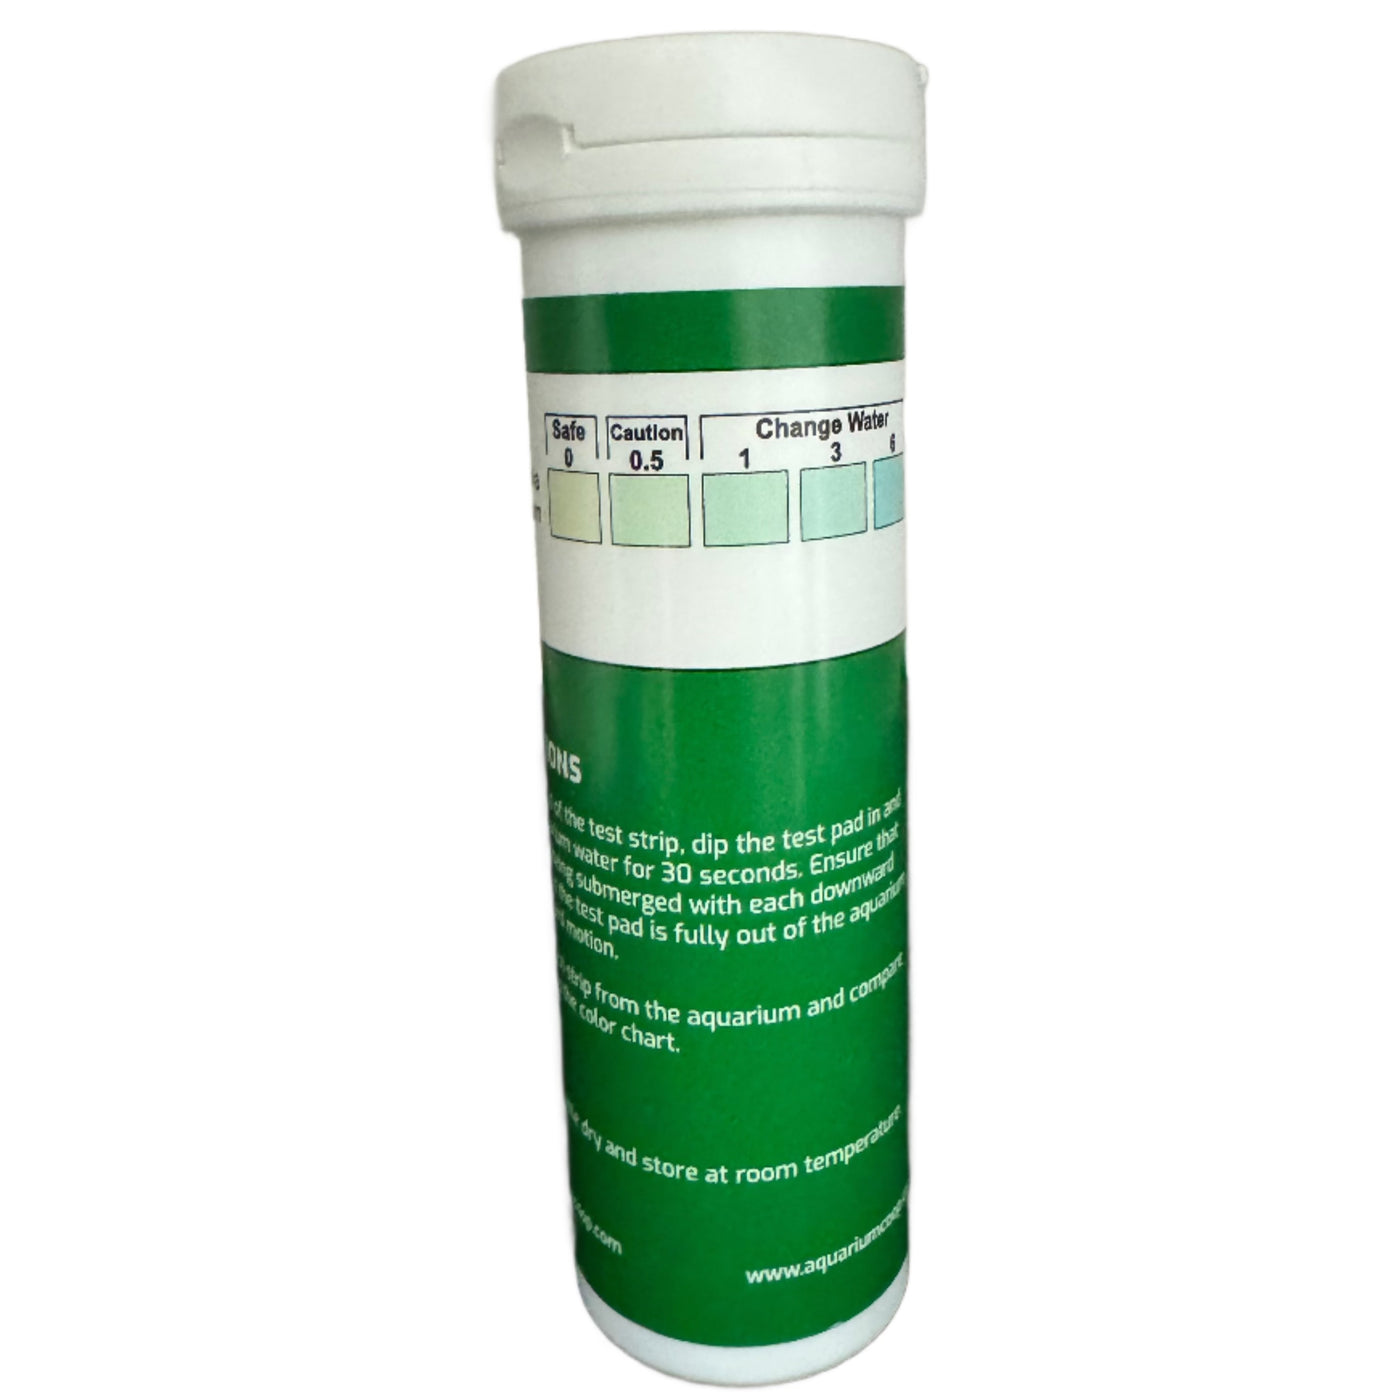 Ammonia Test Strips 25 Count